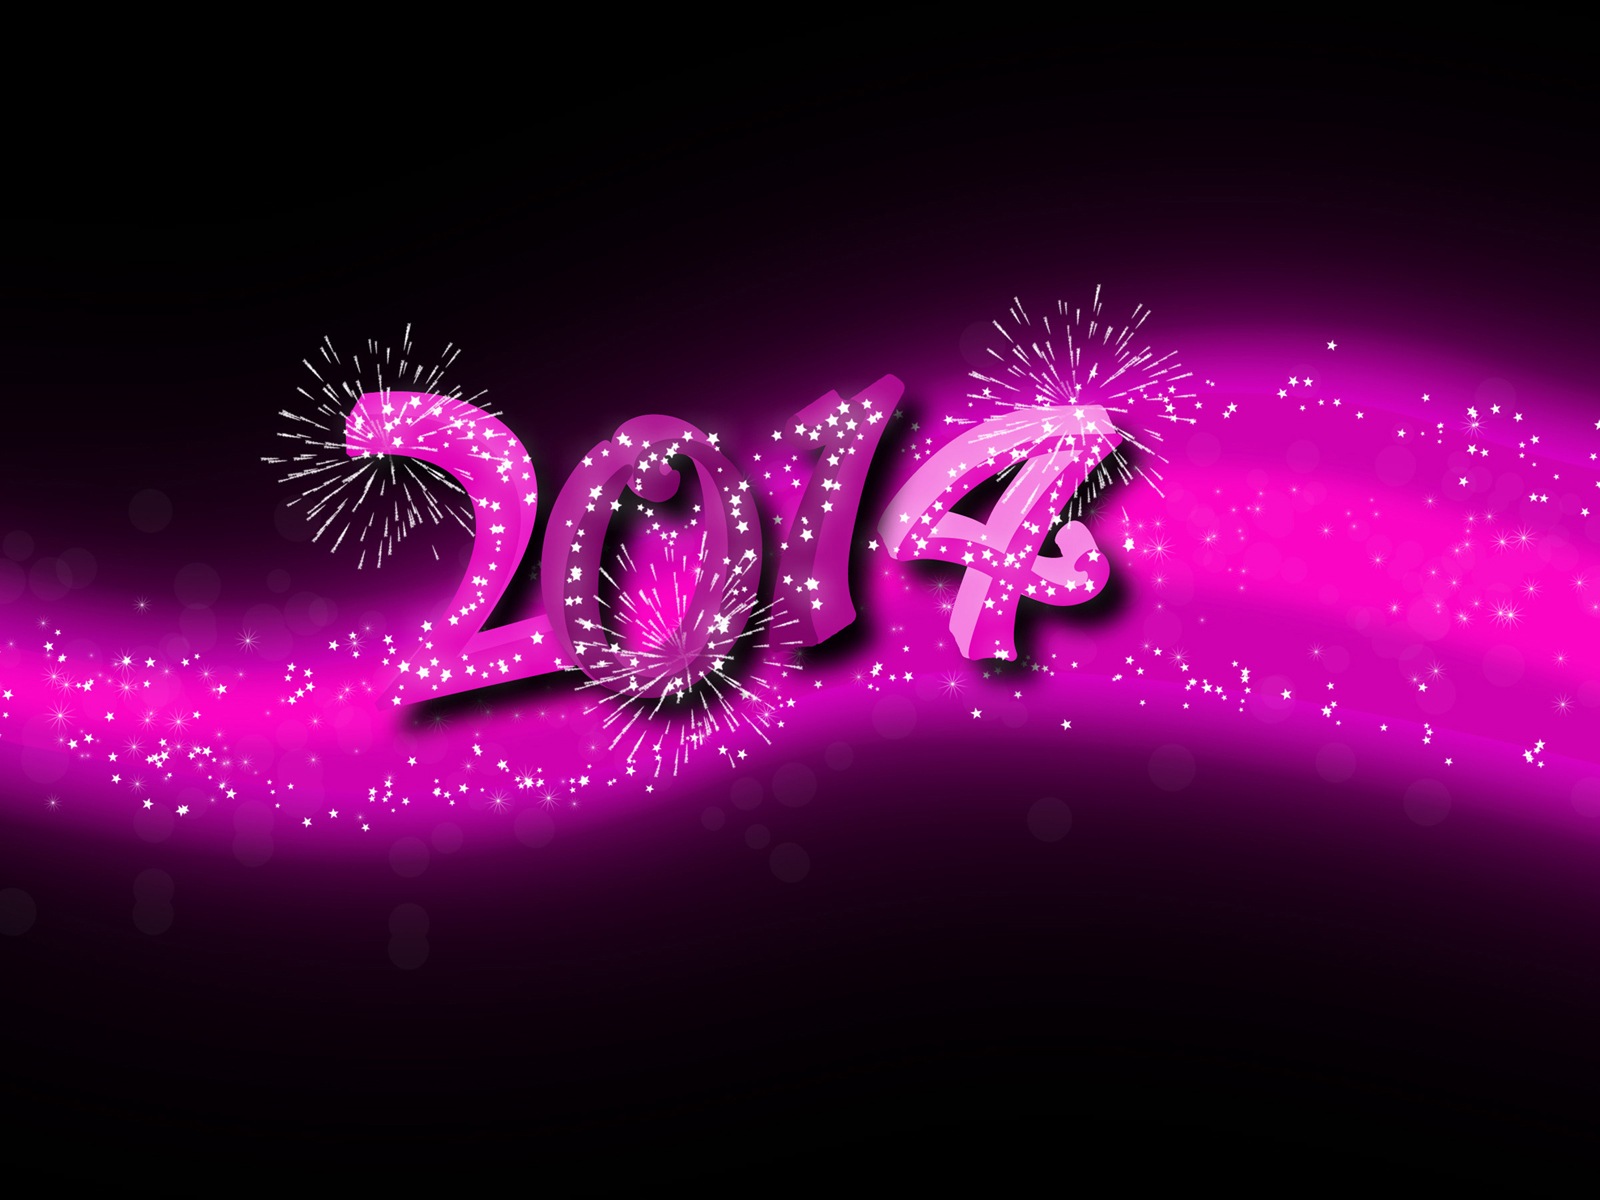 2014 New Year Theme HD Wallpapers (2) #4 - 1600x1200